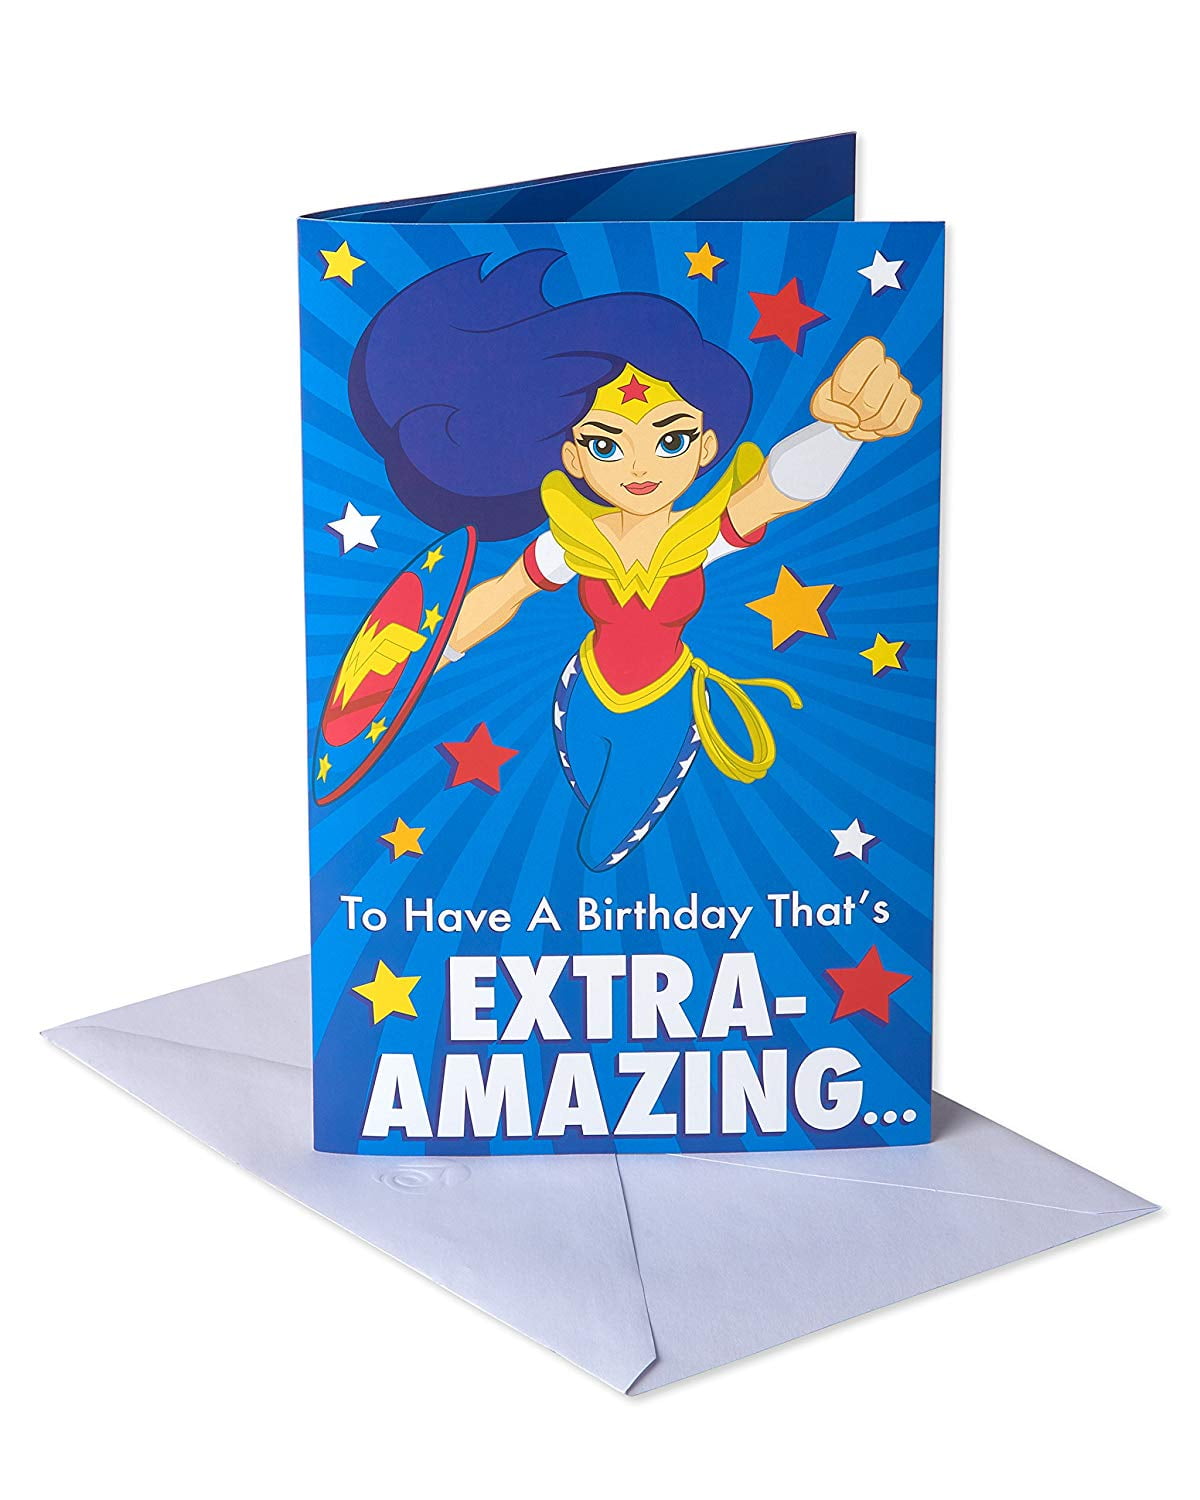 American Greetings Wonder Woman Birthday Card for Girl with Sound ...